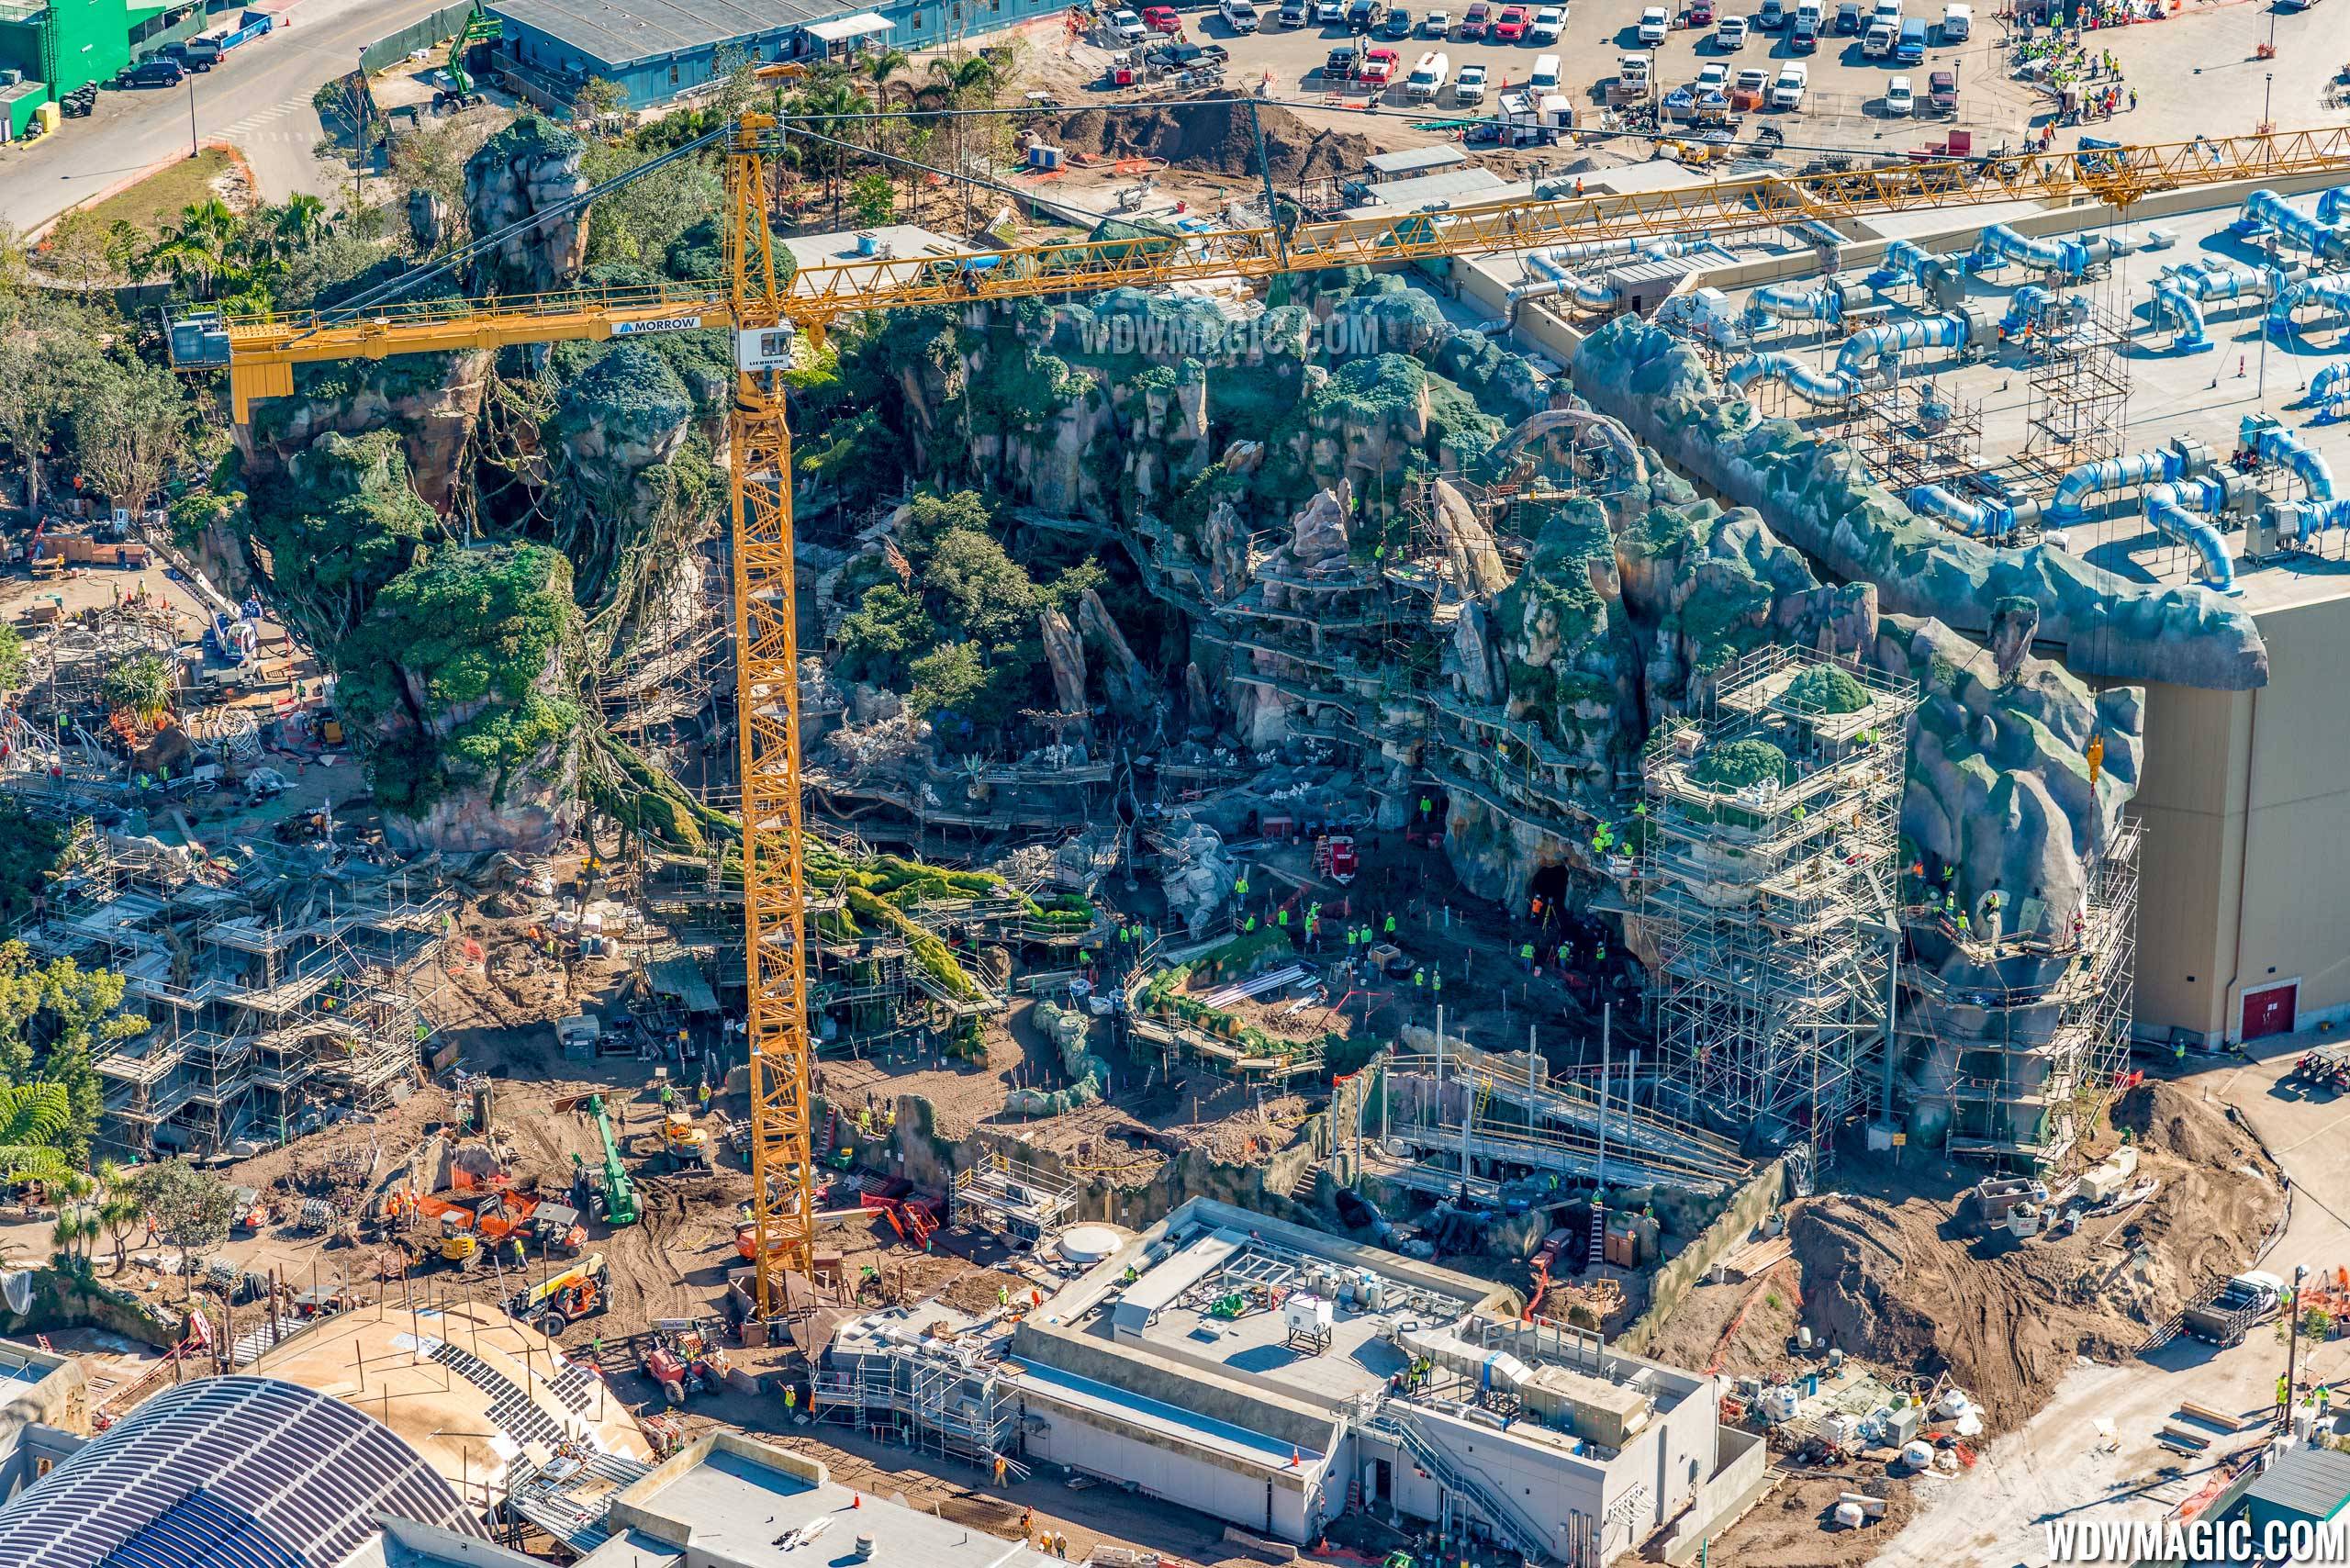 PHOTOS - Stunning views of 'Pandora - The World of Avatar' from the air